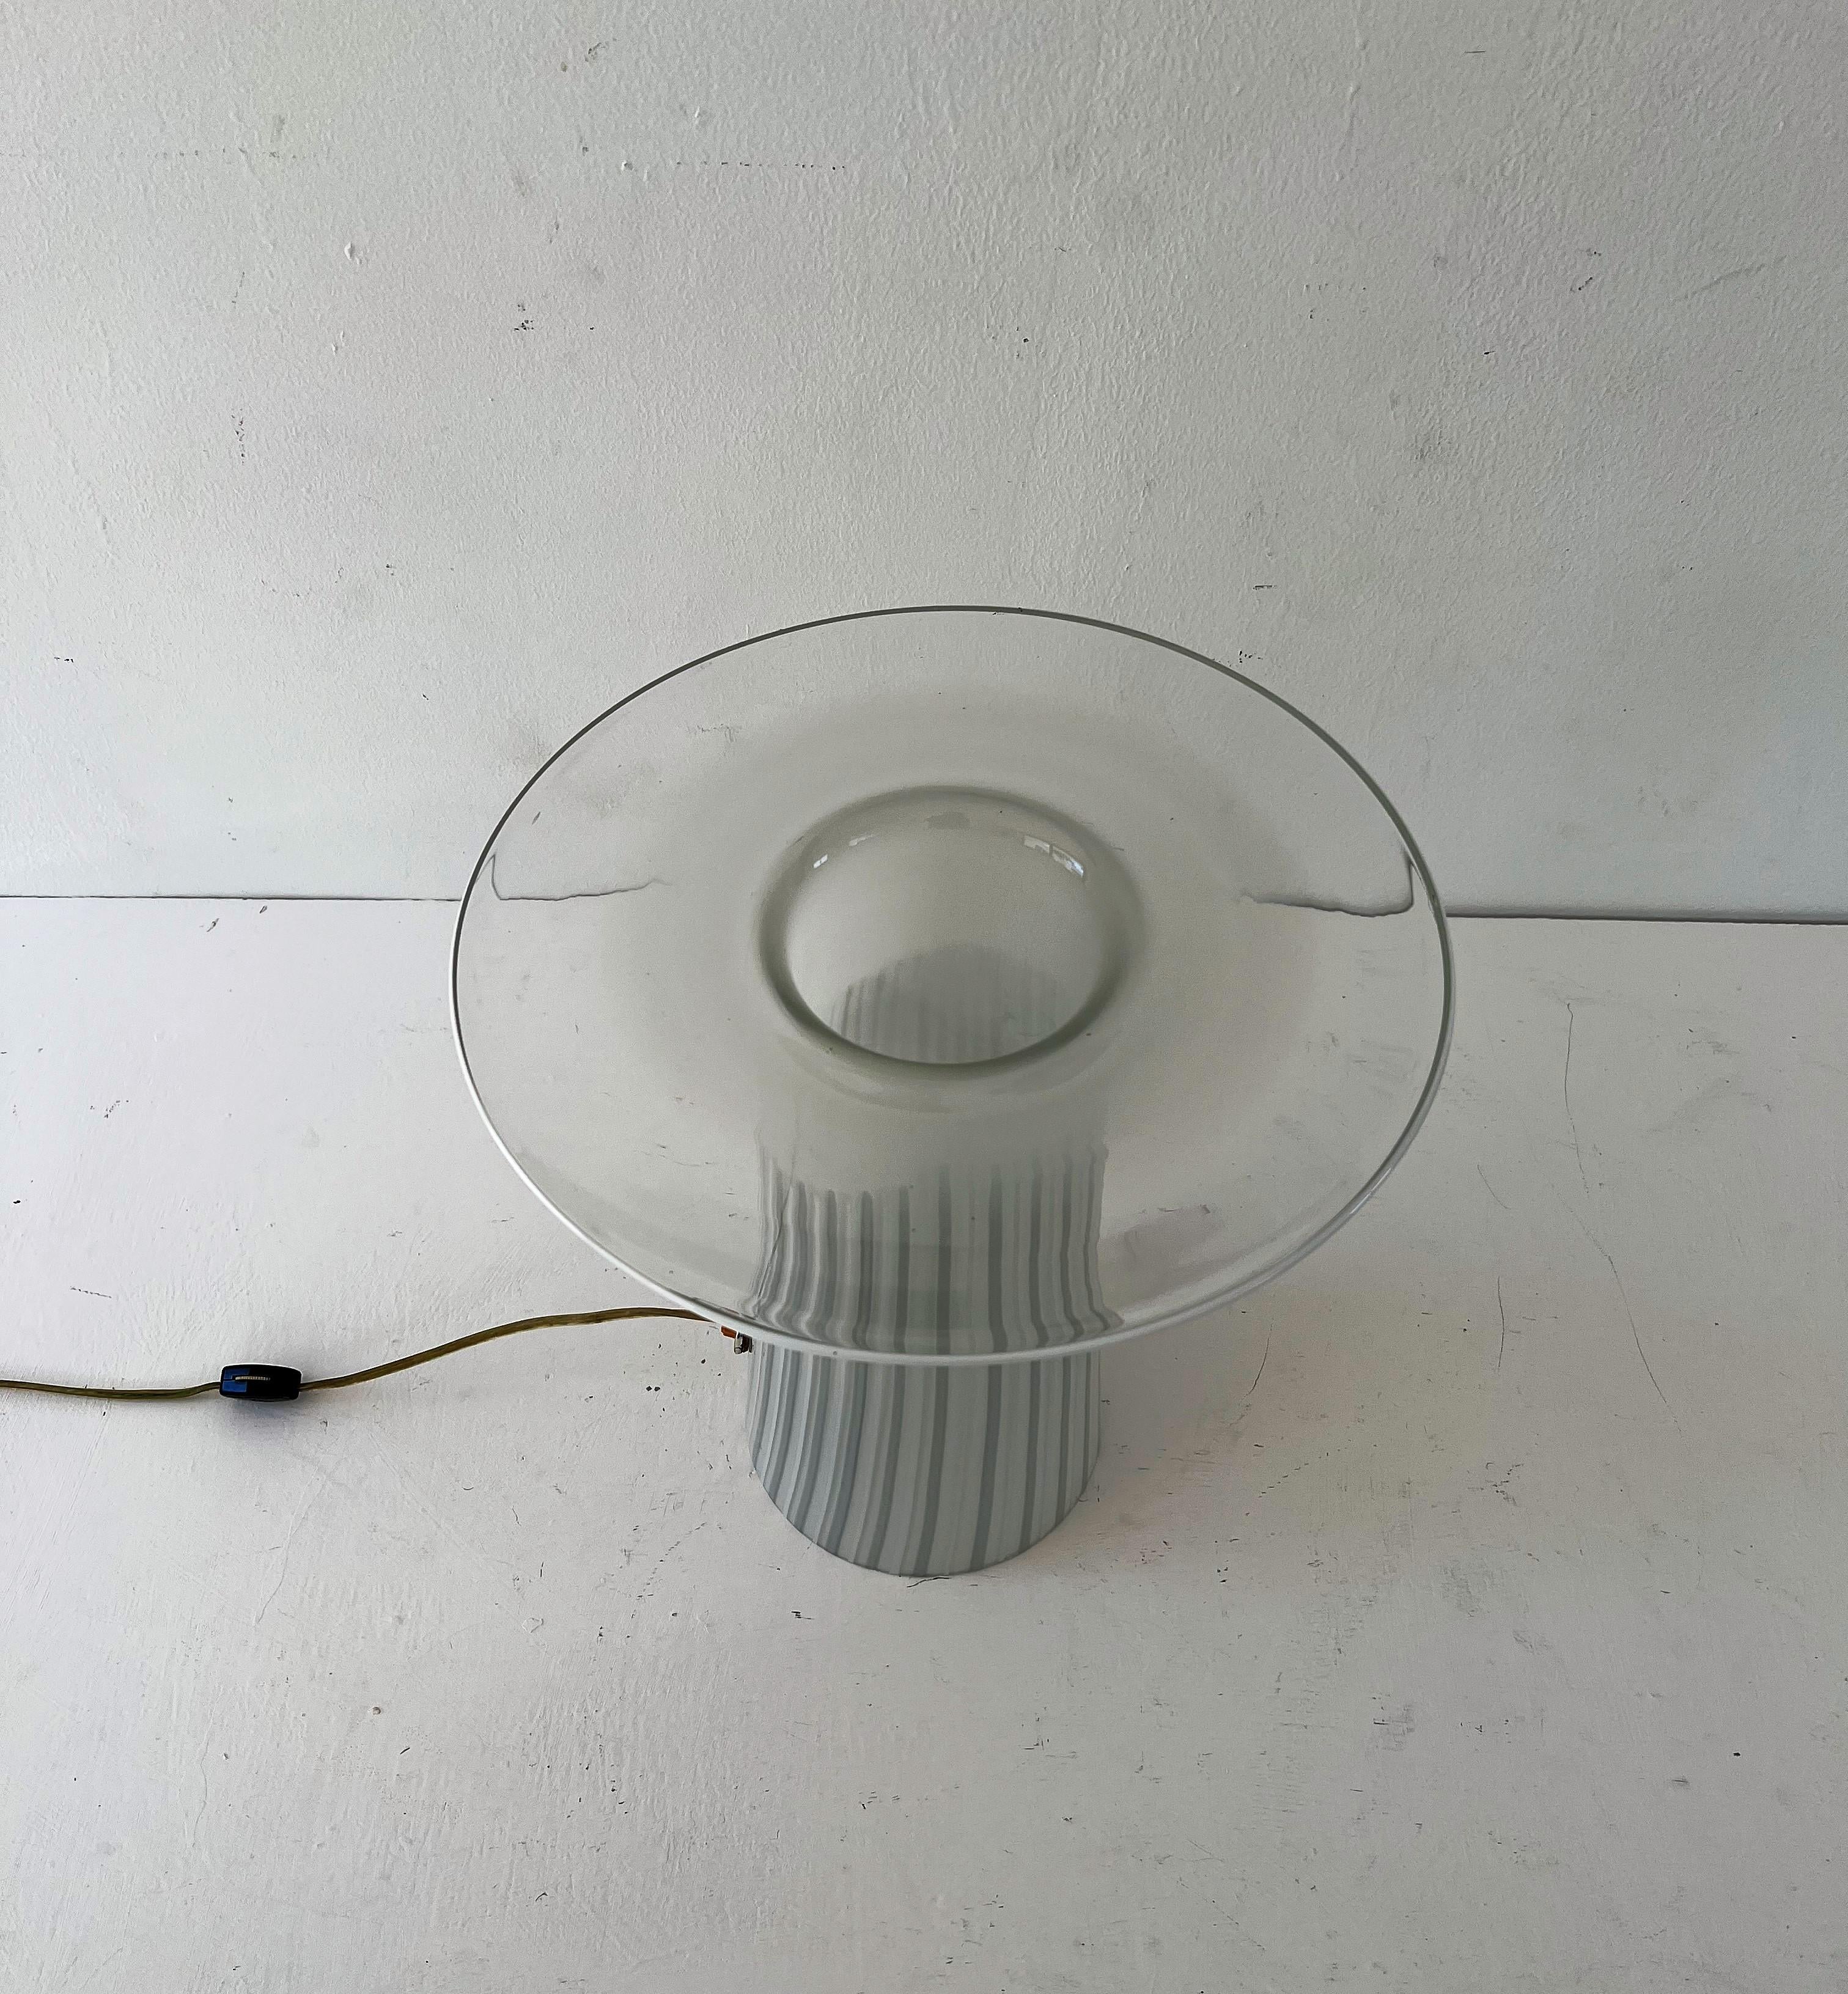 Mid-Century Modern Table Lamp in the Manner of Lino Tagliapietra, Murano 1970s In Good Condition For Sale In Merida, Yucatan